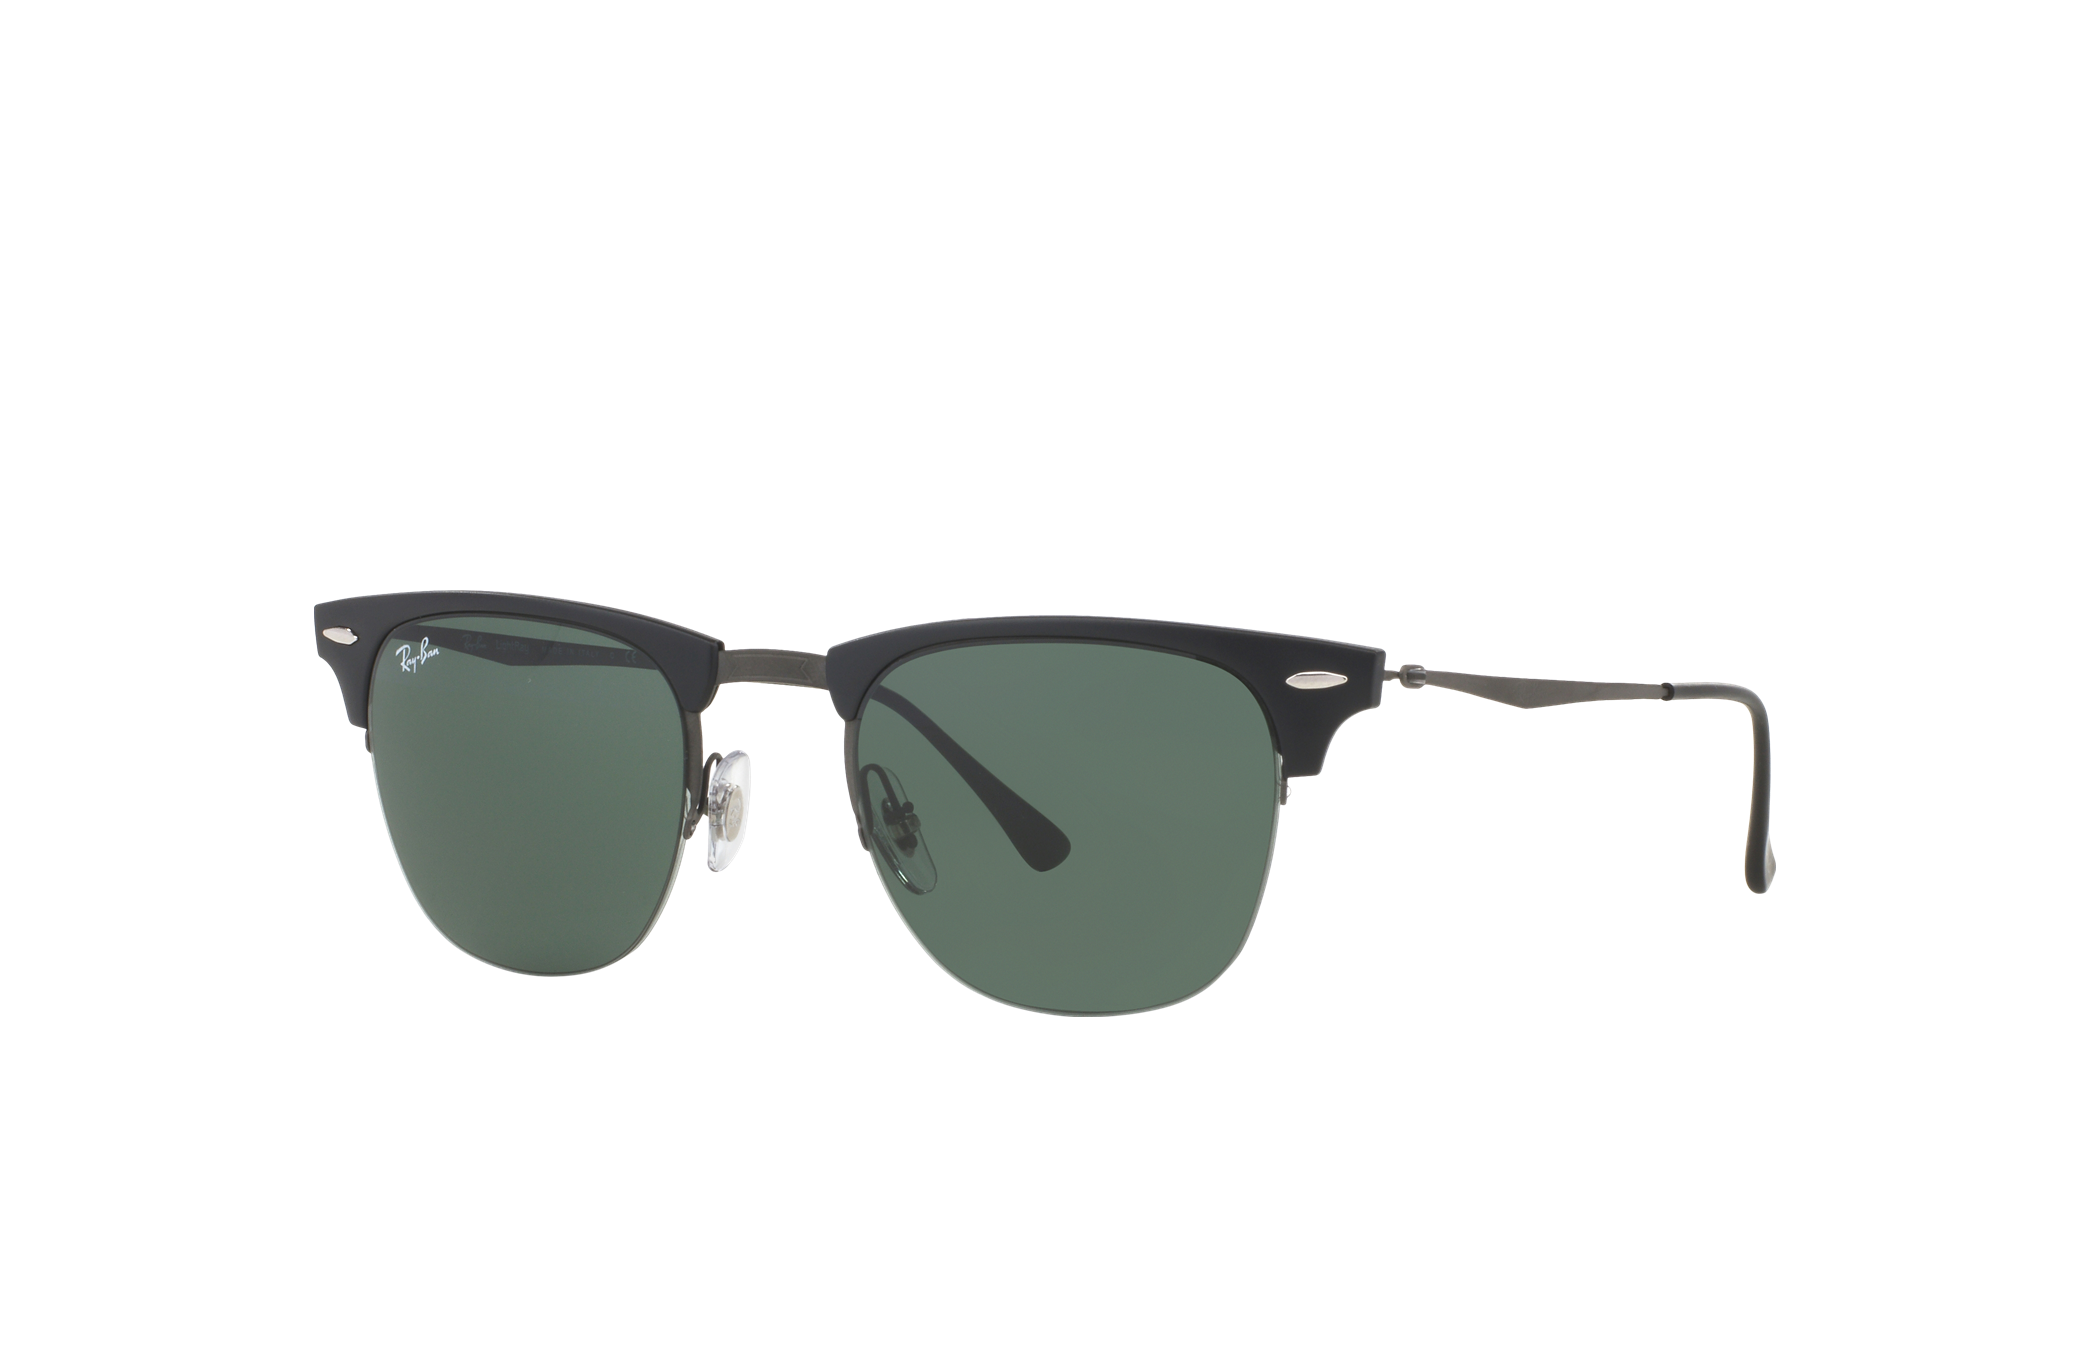 Clubmaster Light Ray Sunglasses in Black and Green | Ray-Ban®